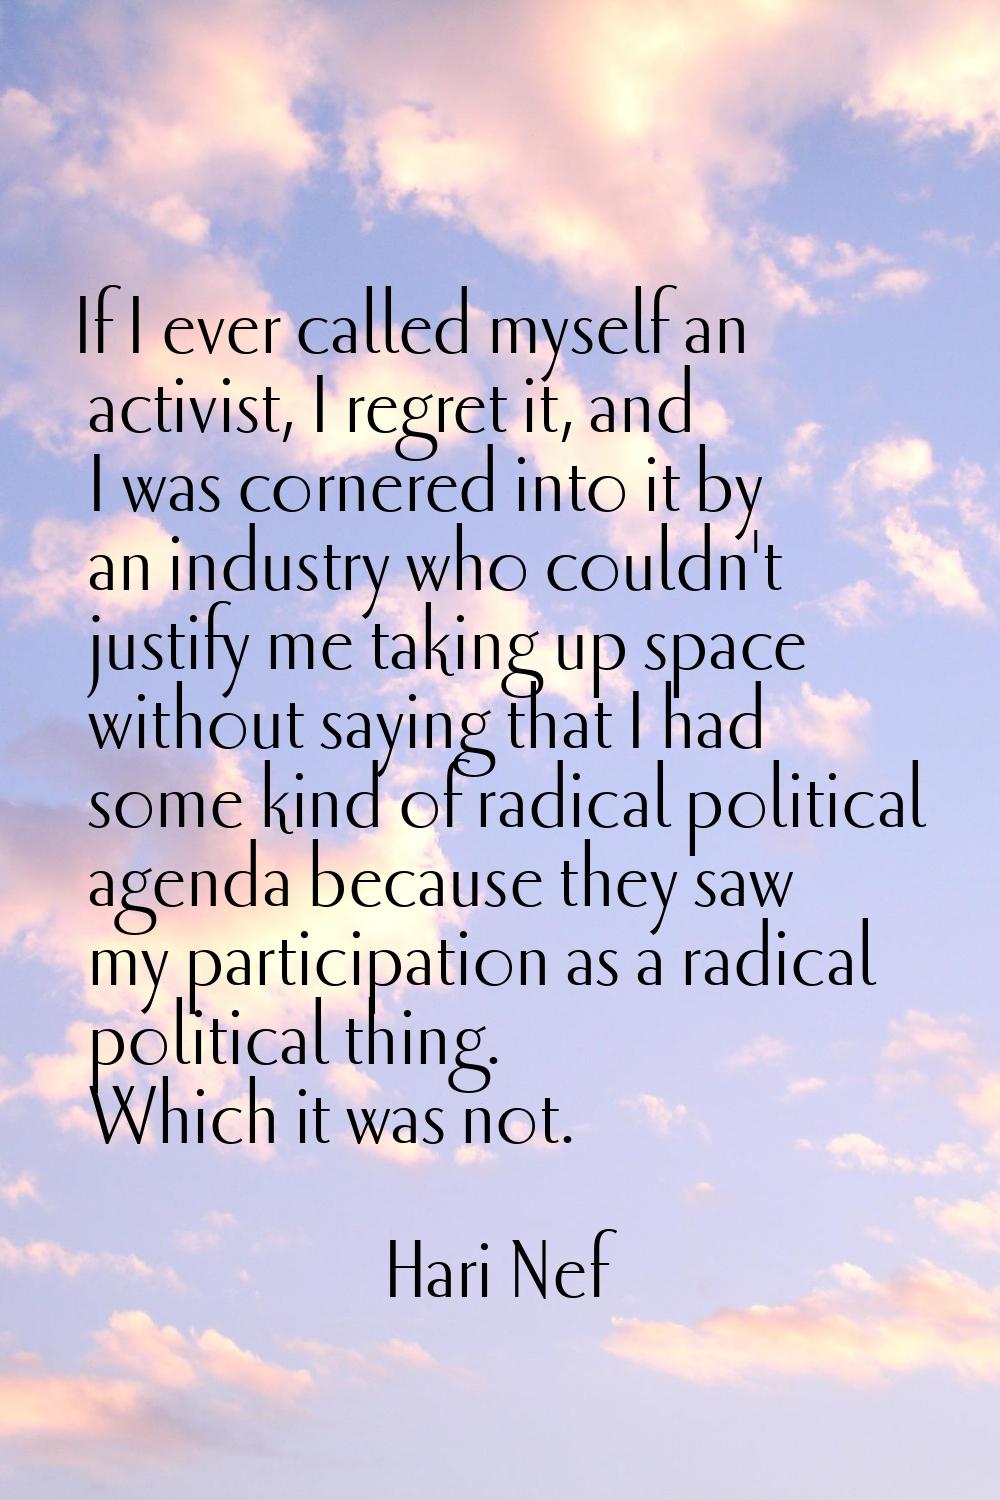 If I ever called myself an activist, I regret it, and I was cornered into it by an industry who cou